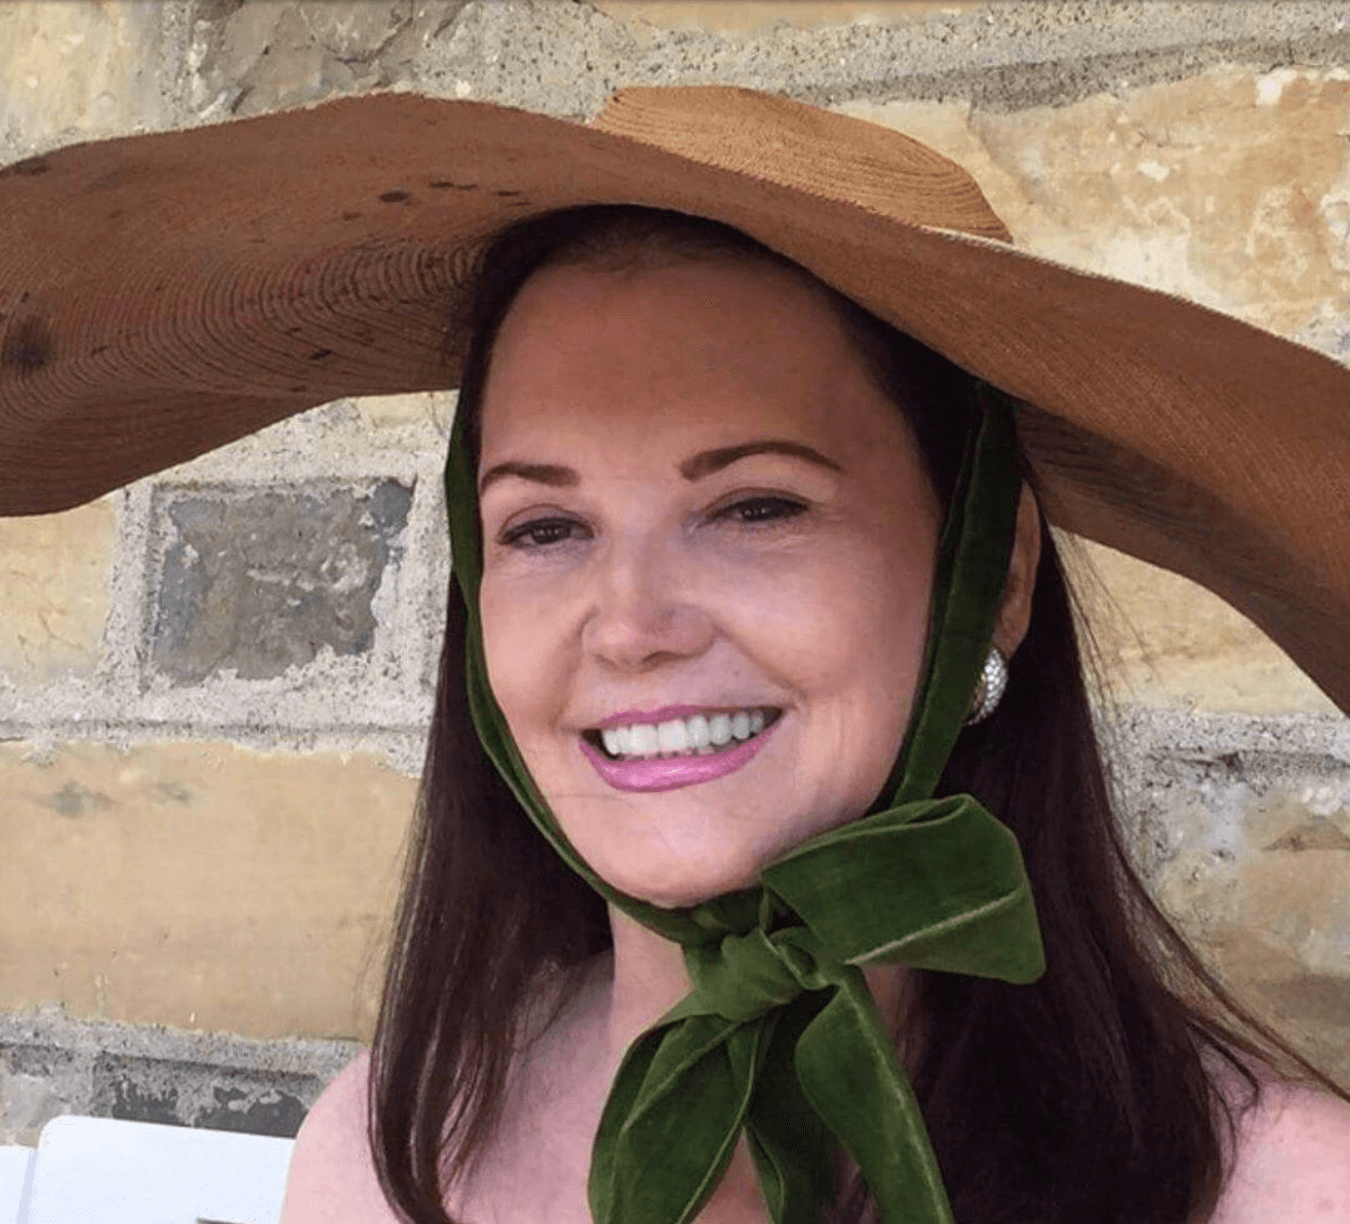 EXCLUSIVE: ‘Southern Charm’ Star Patricia Altschul’s SECRET Confederate Decor Exposed!